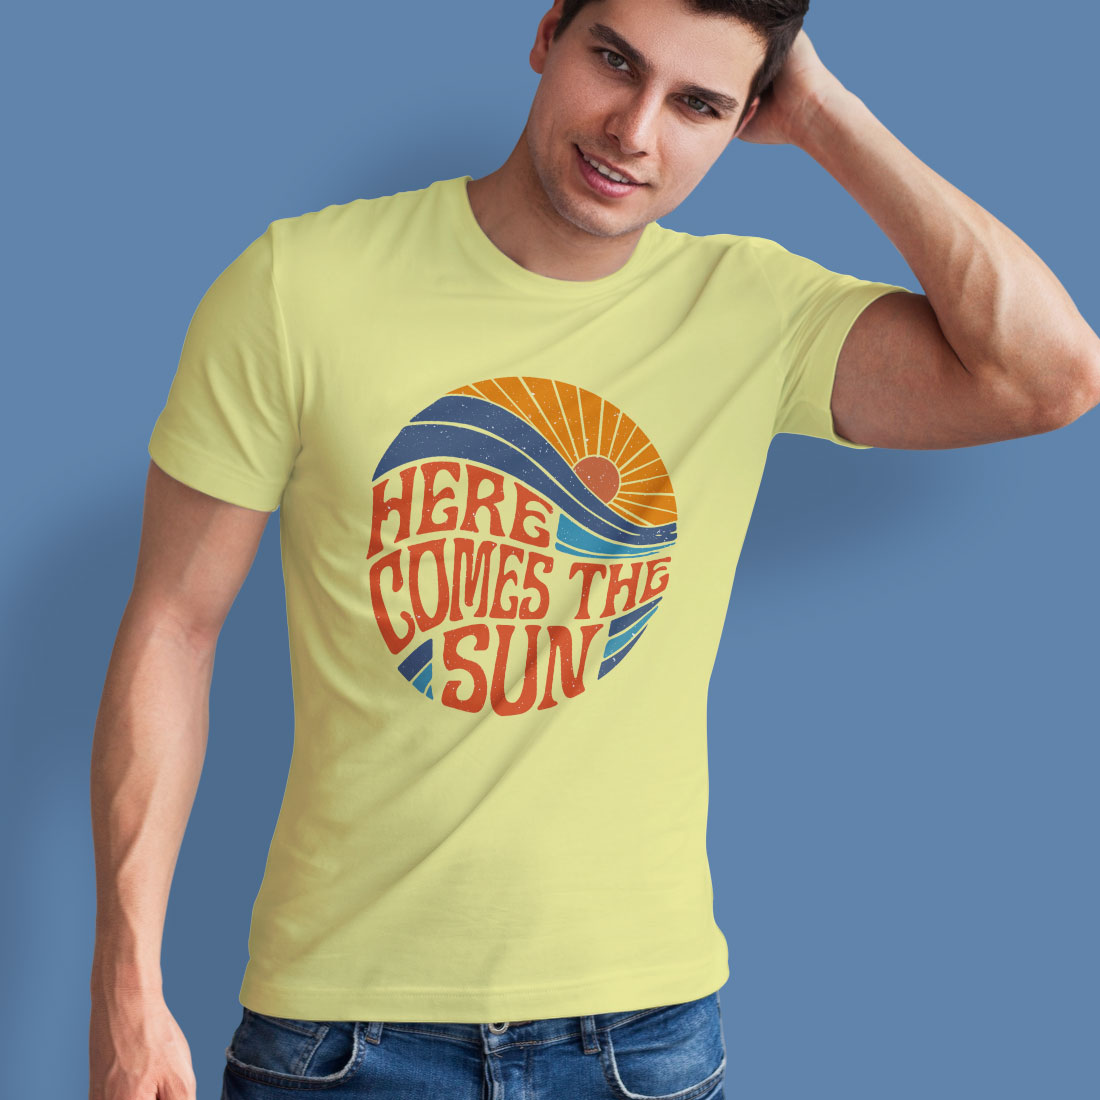 Here Comes The Sun Hoodie  The Beatles Hoodies & T-shirts in